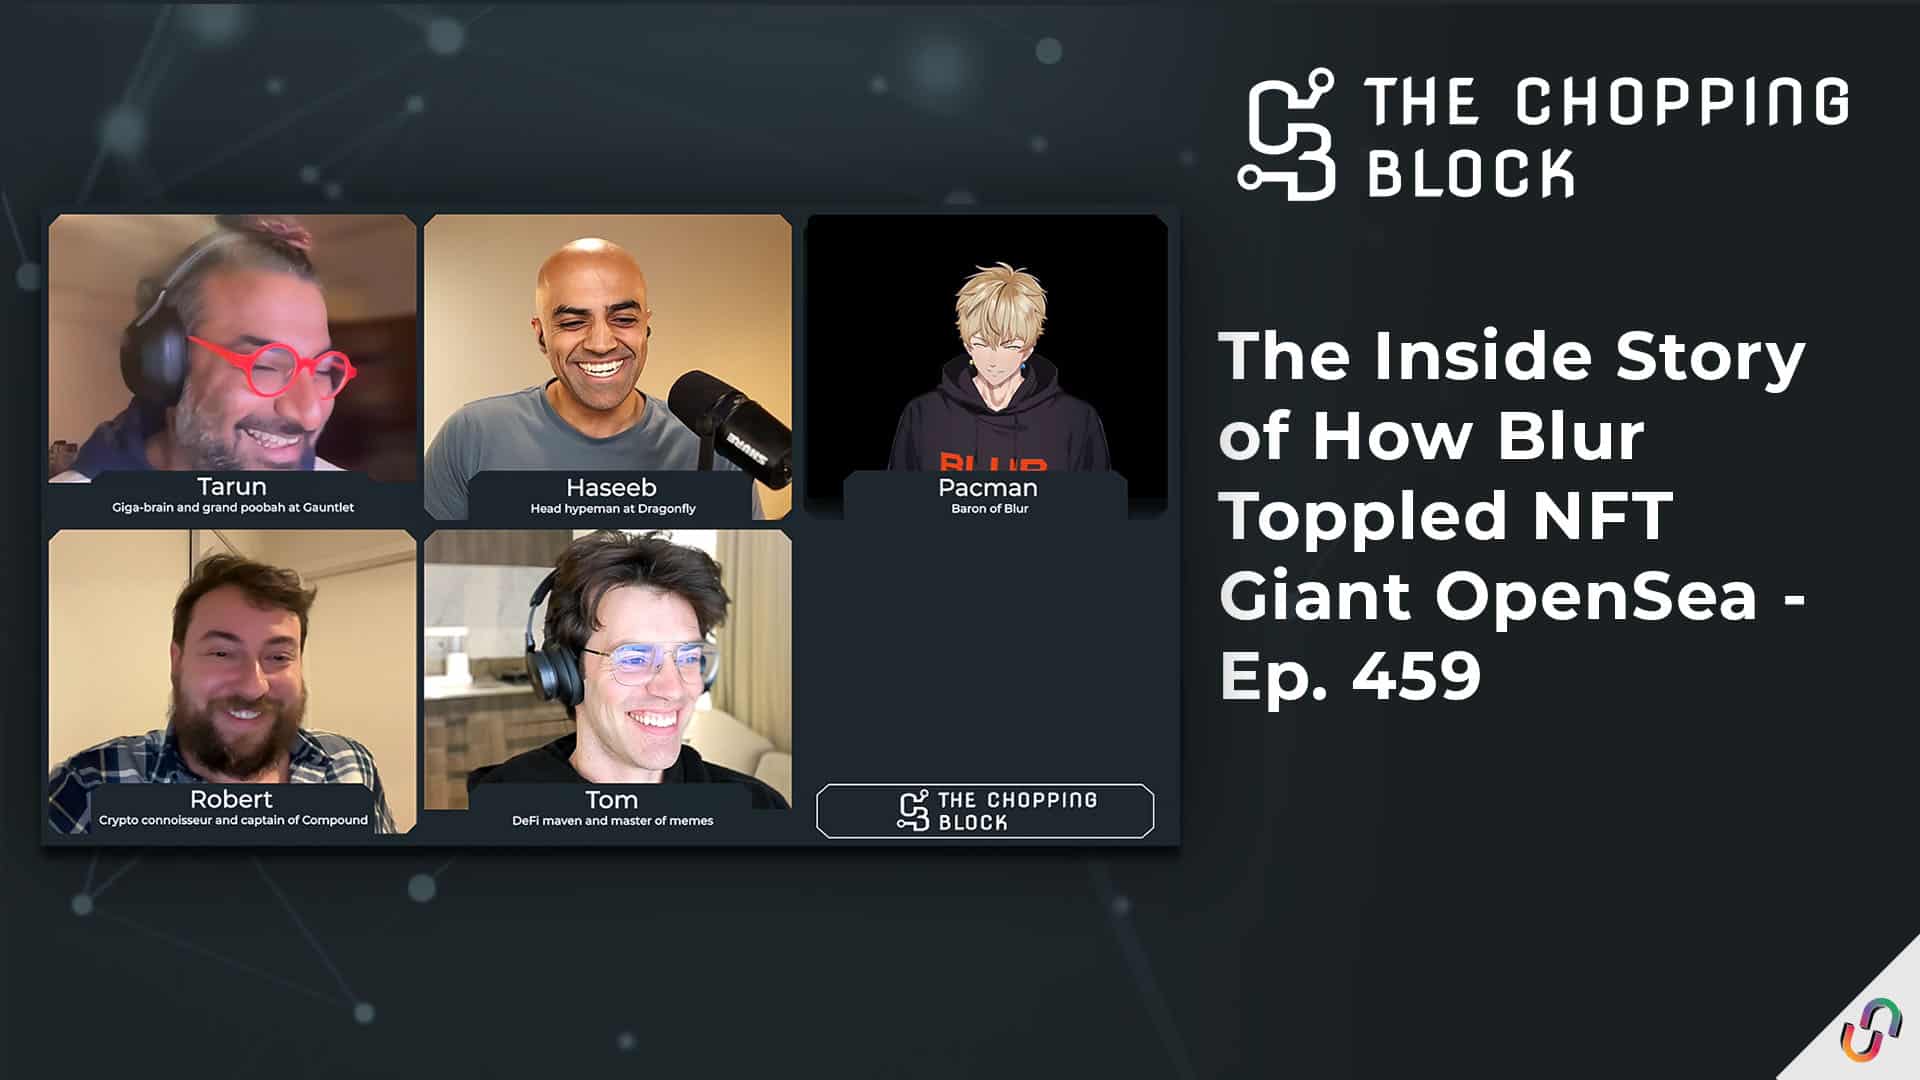 The Chopping Block: The Inside Story of How Blur Toppled NFT Giant OpenSea - Ep. 459